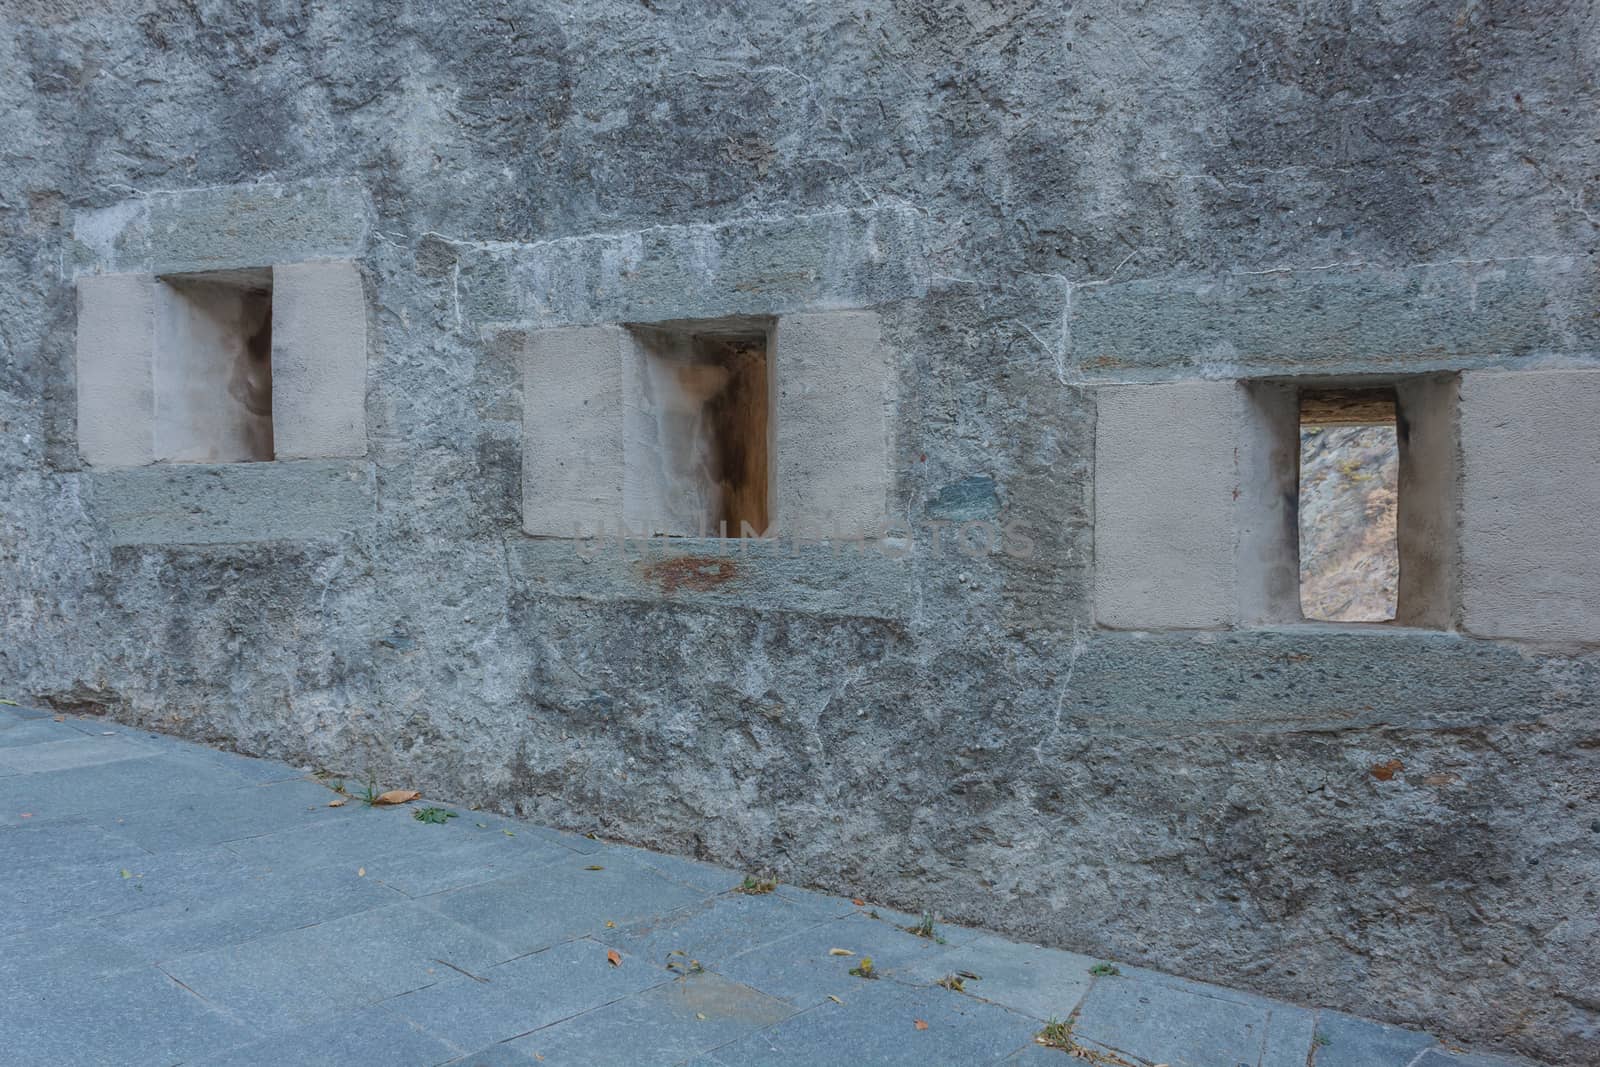 the slits were openings in the wall of fortress to spy on and to use the  weapons against the enemies